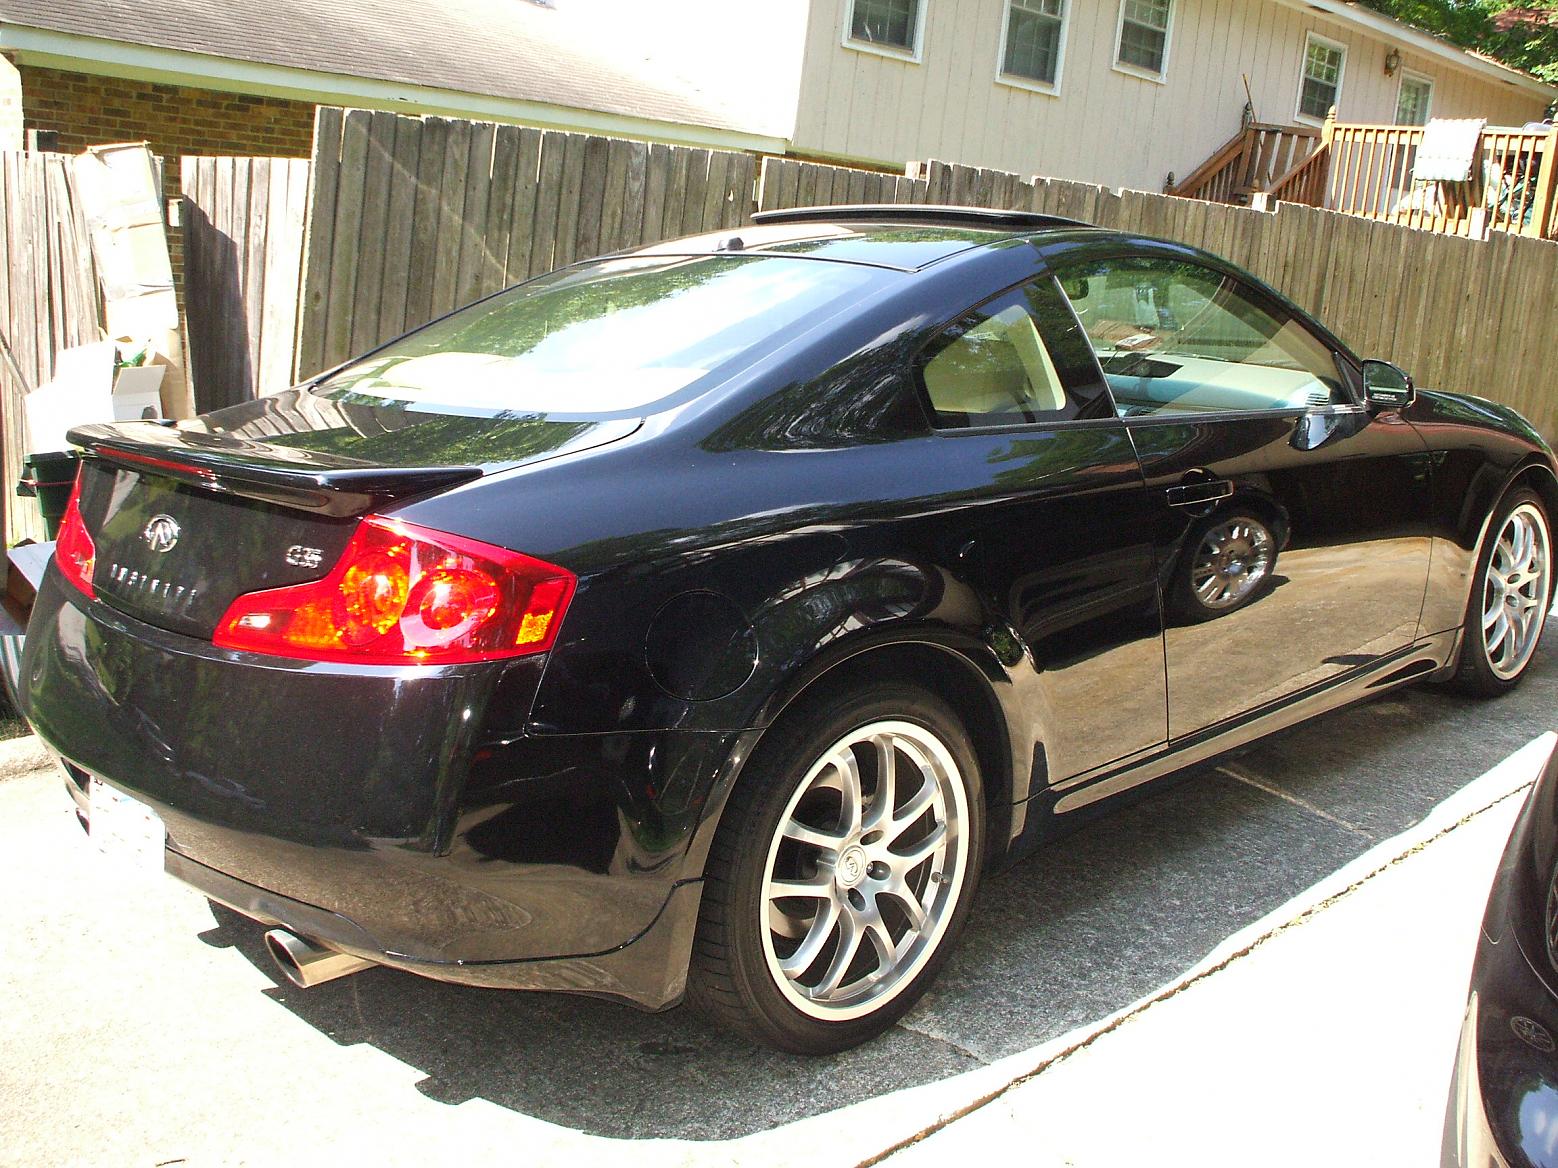 FS: 2007 Infiniti G35 Coupe 6MT Black (Fully Loaded) - G35Driver